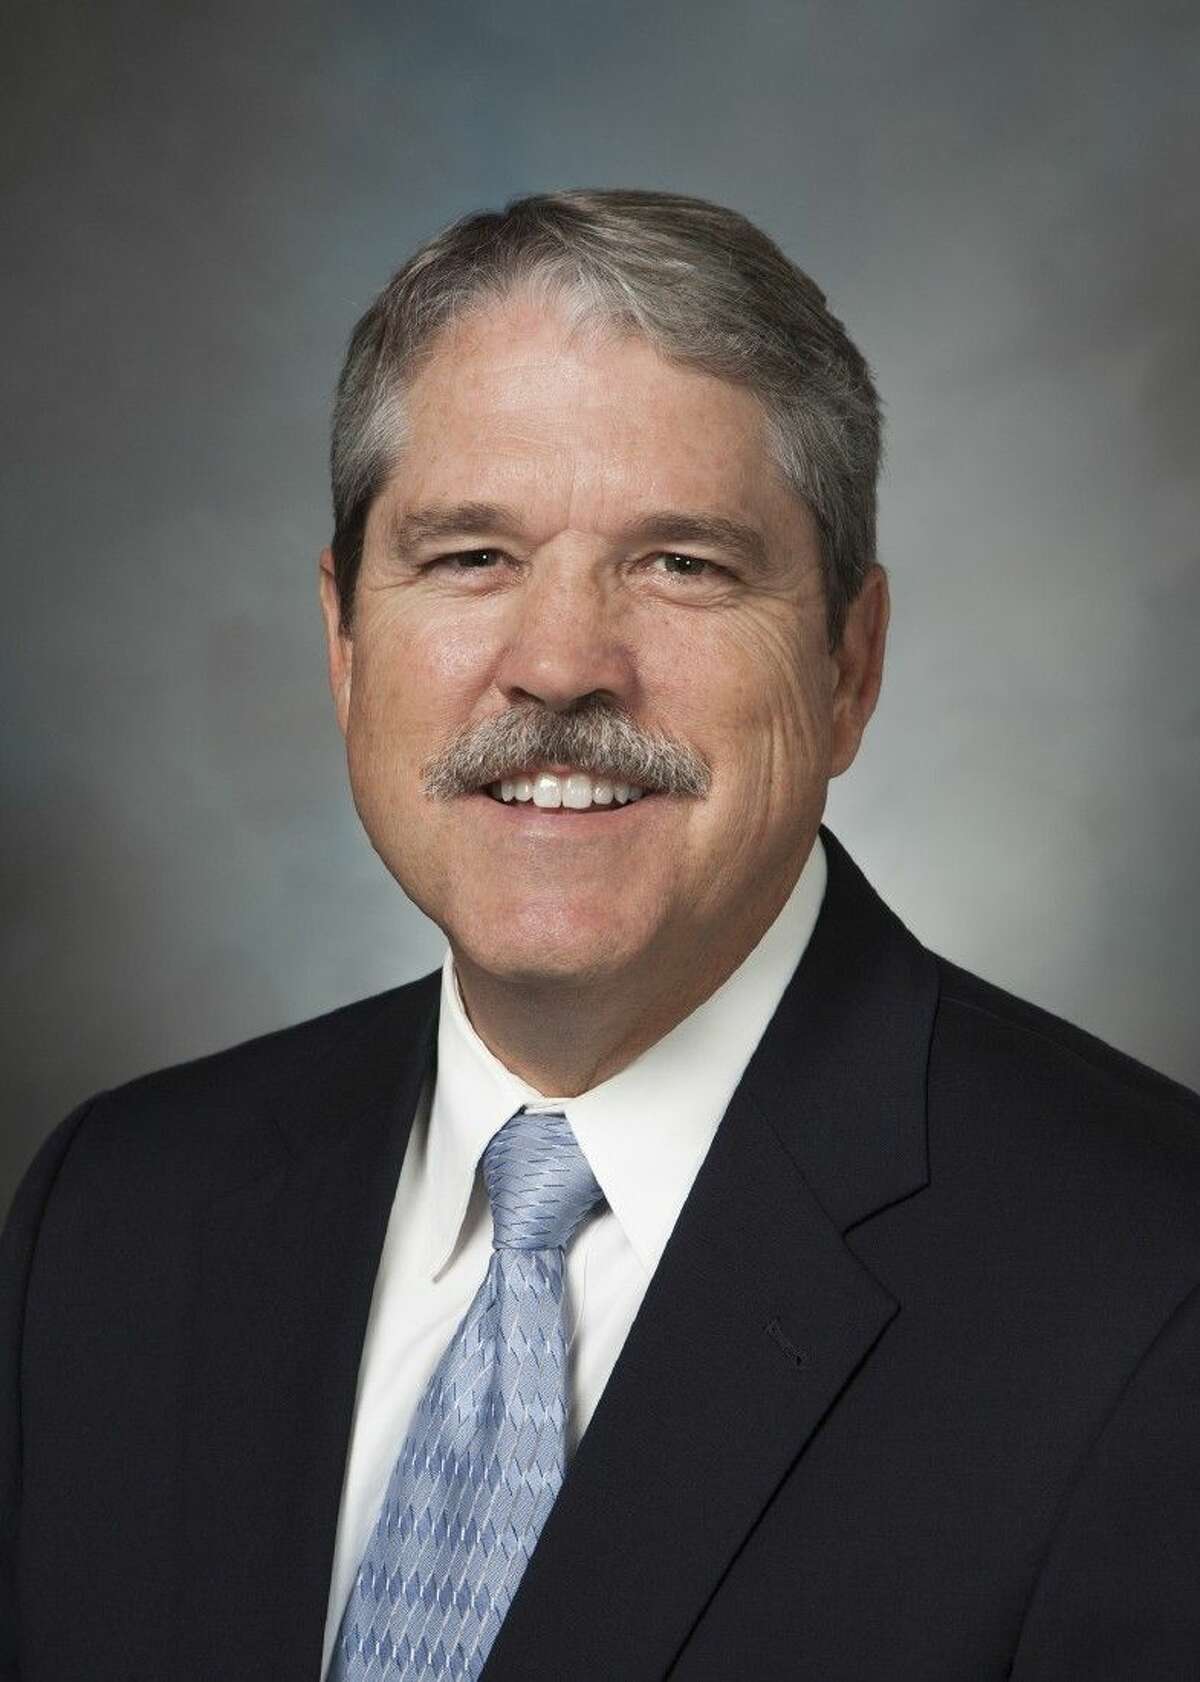 Sen. Larry Taylor represents Senate District 11, comprised of parts of Brazoria, Galveston, and Harris Counties. Before his election to the Texas Senate in 2012, Sen. Taylor served five terms in the Texas House of Representatives.